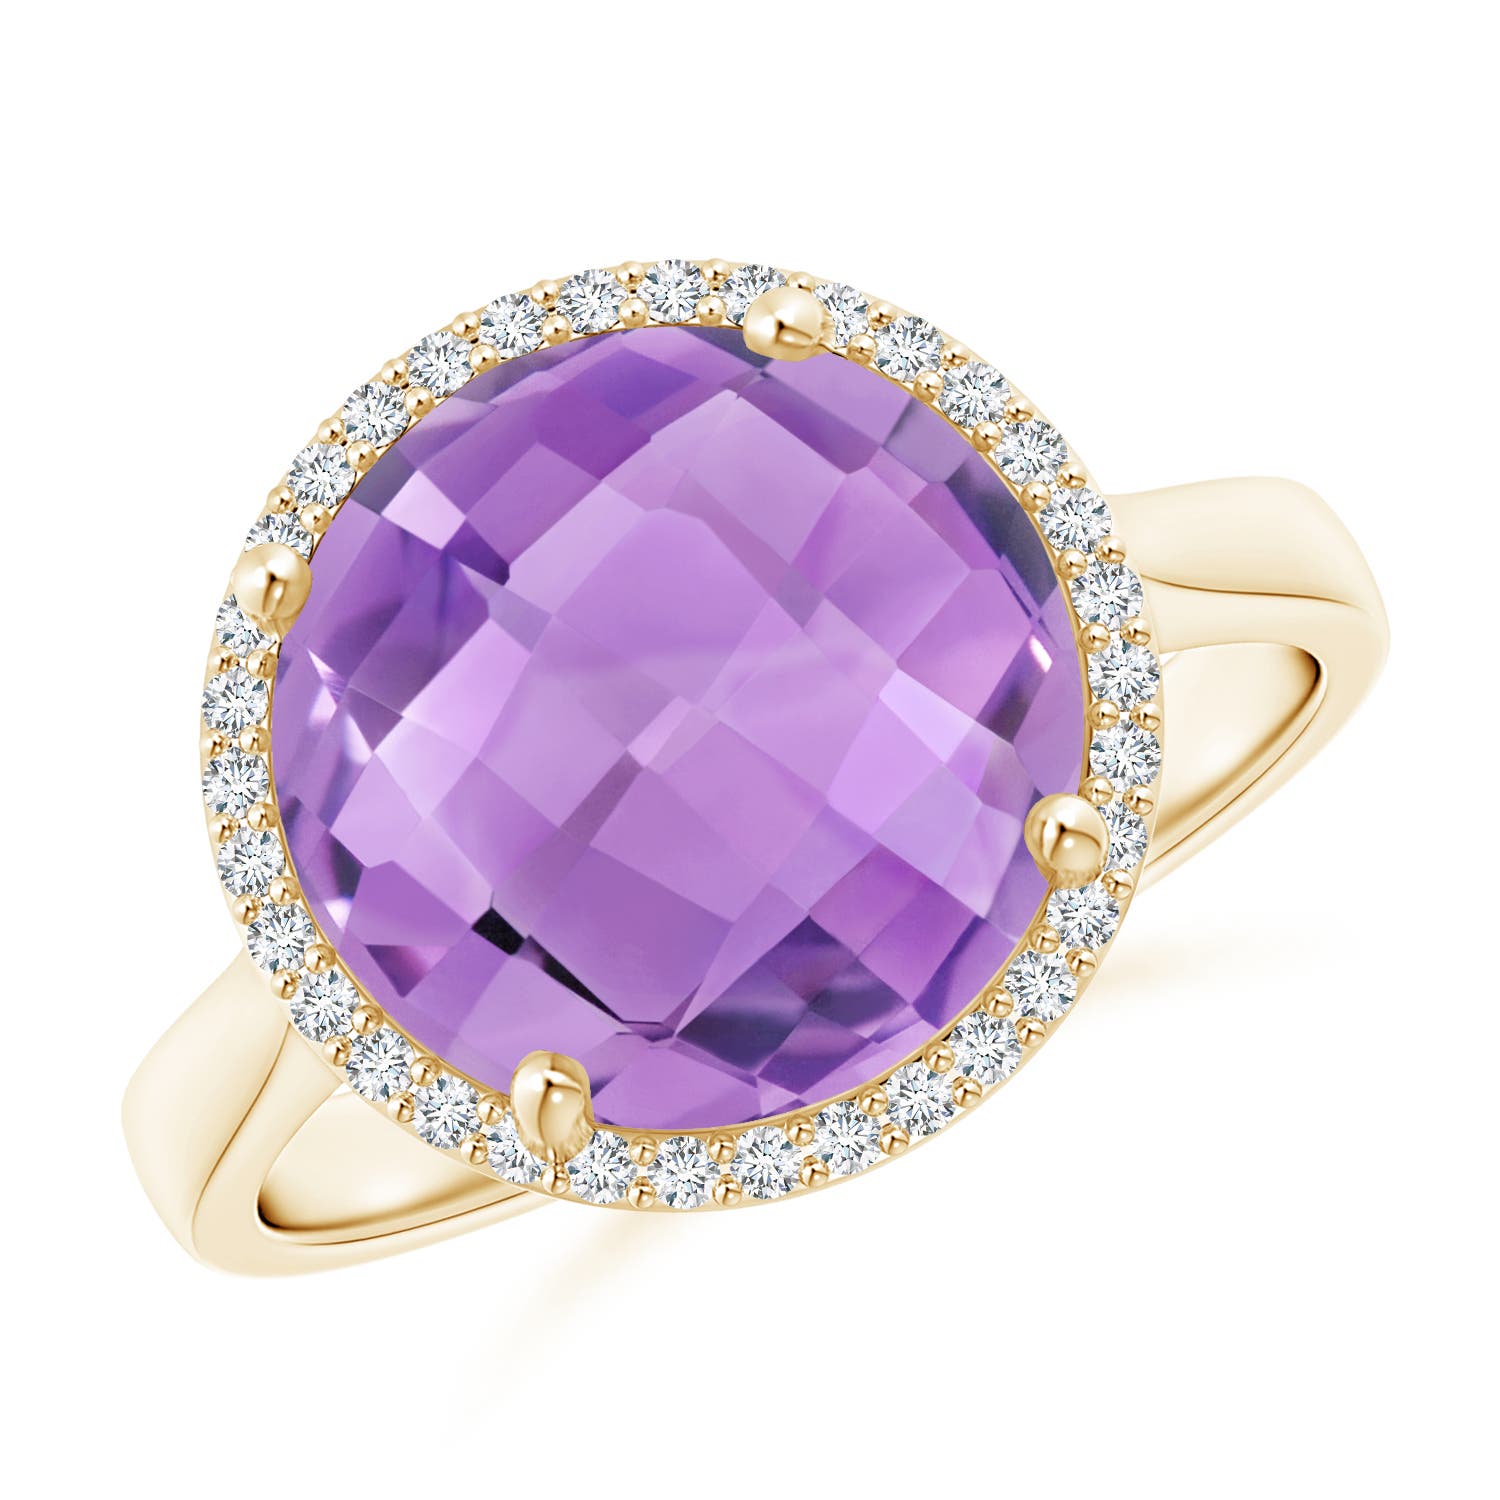 A - Amethyst / 5.02 CT / 14 KT Yellow Gold